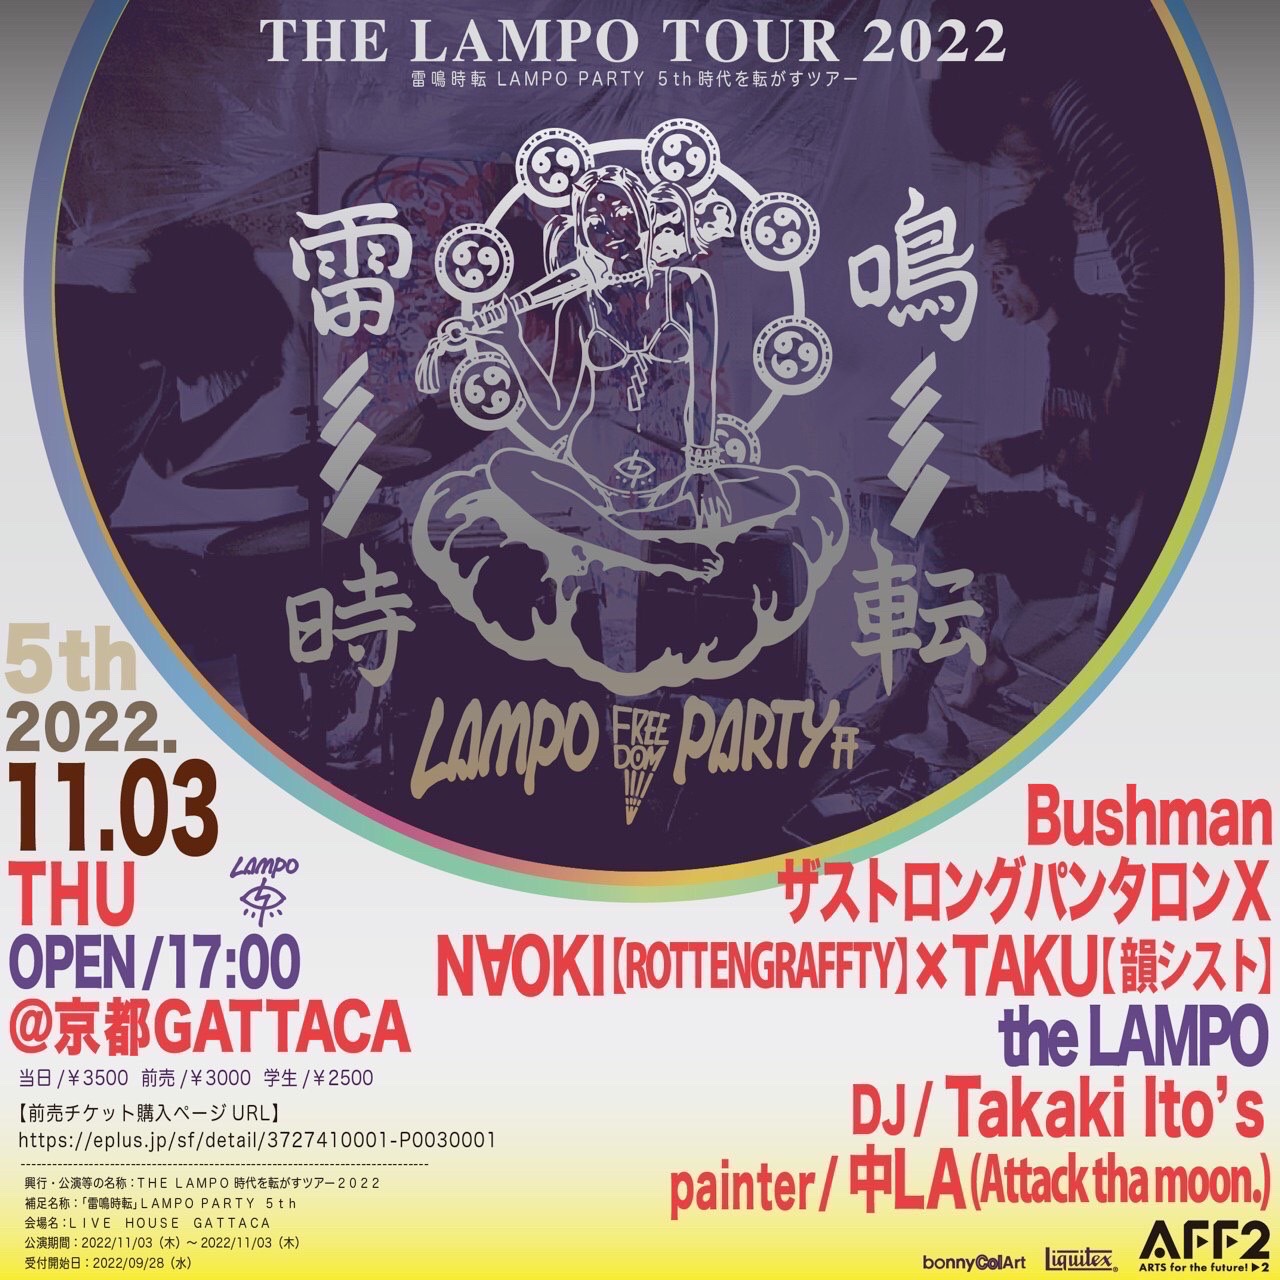 THE LAMPO TOUR「雷鳴時転 」LAMPO PARTY 5th ～時代を転がすツアー2022～